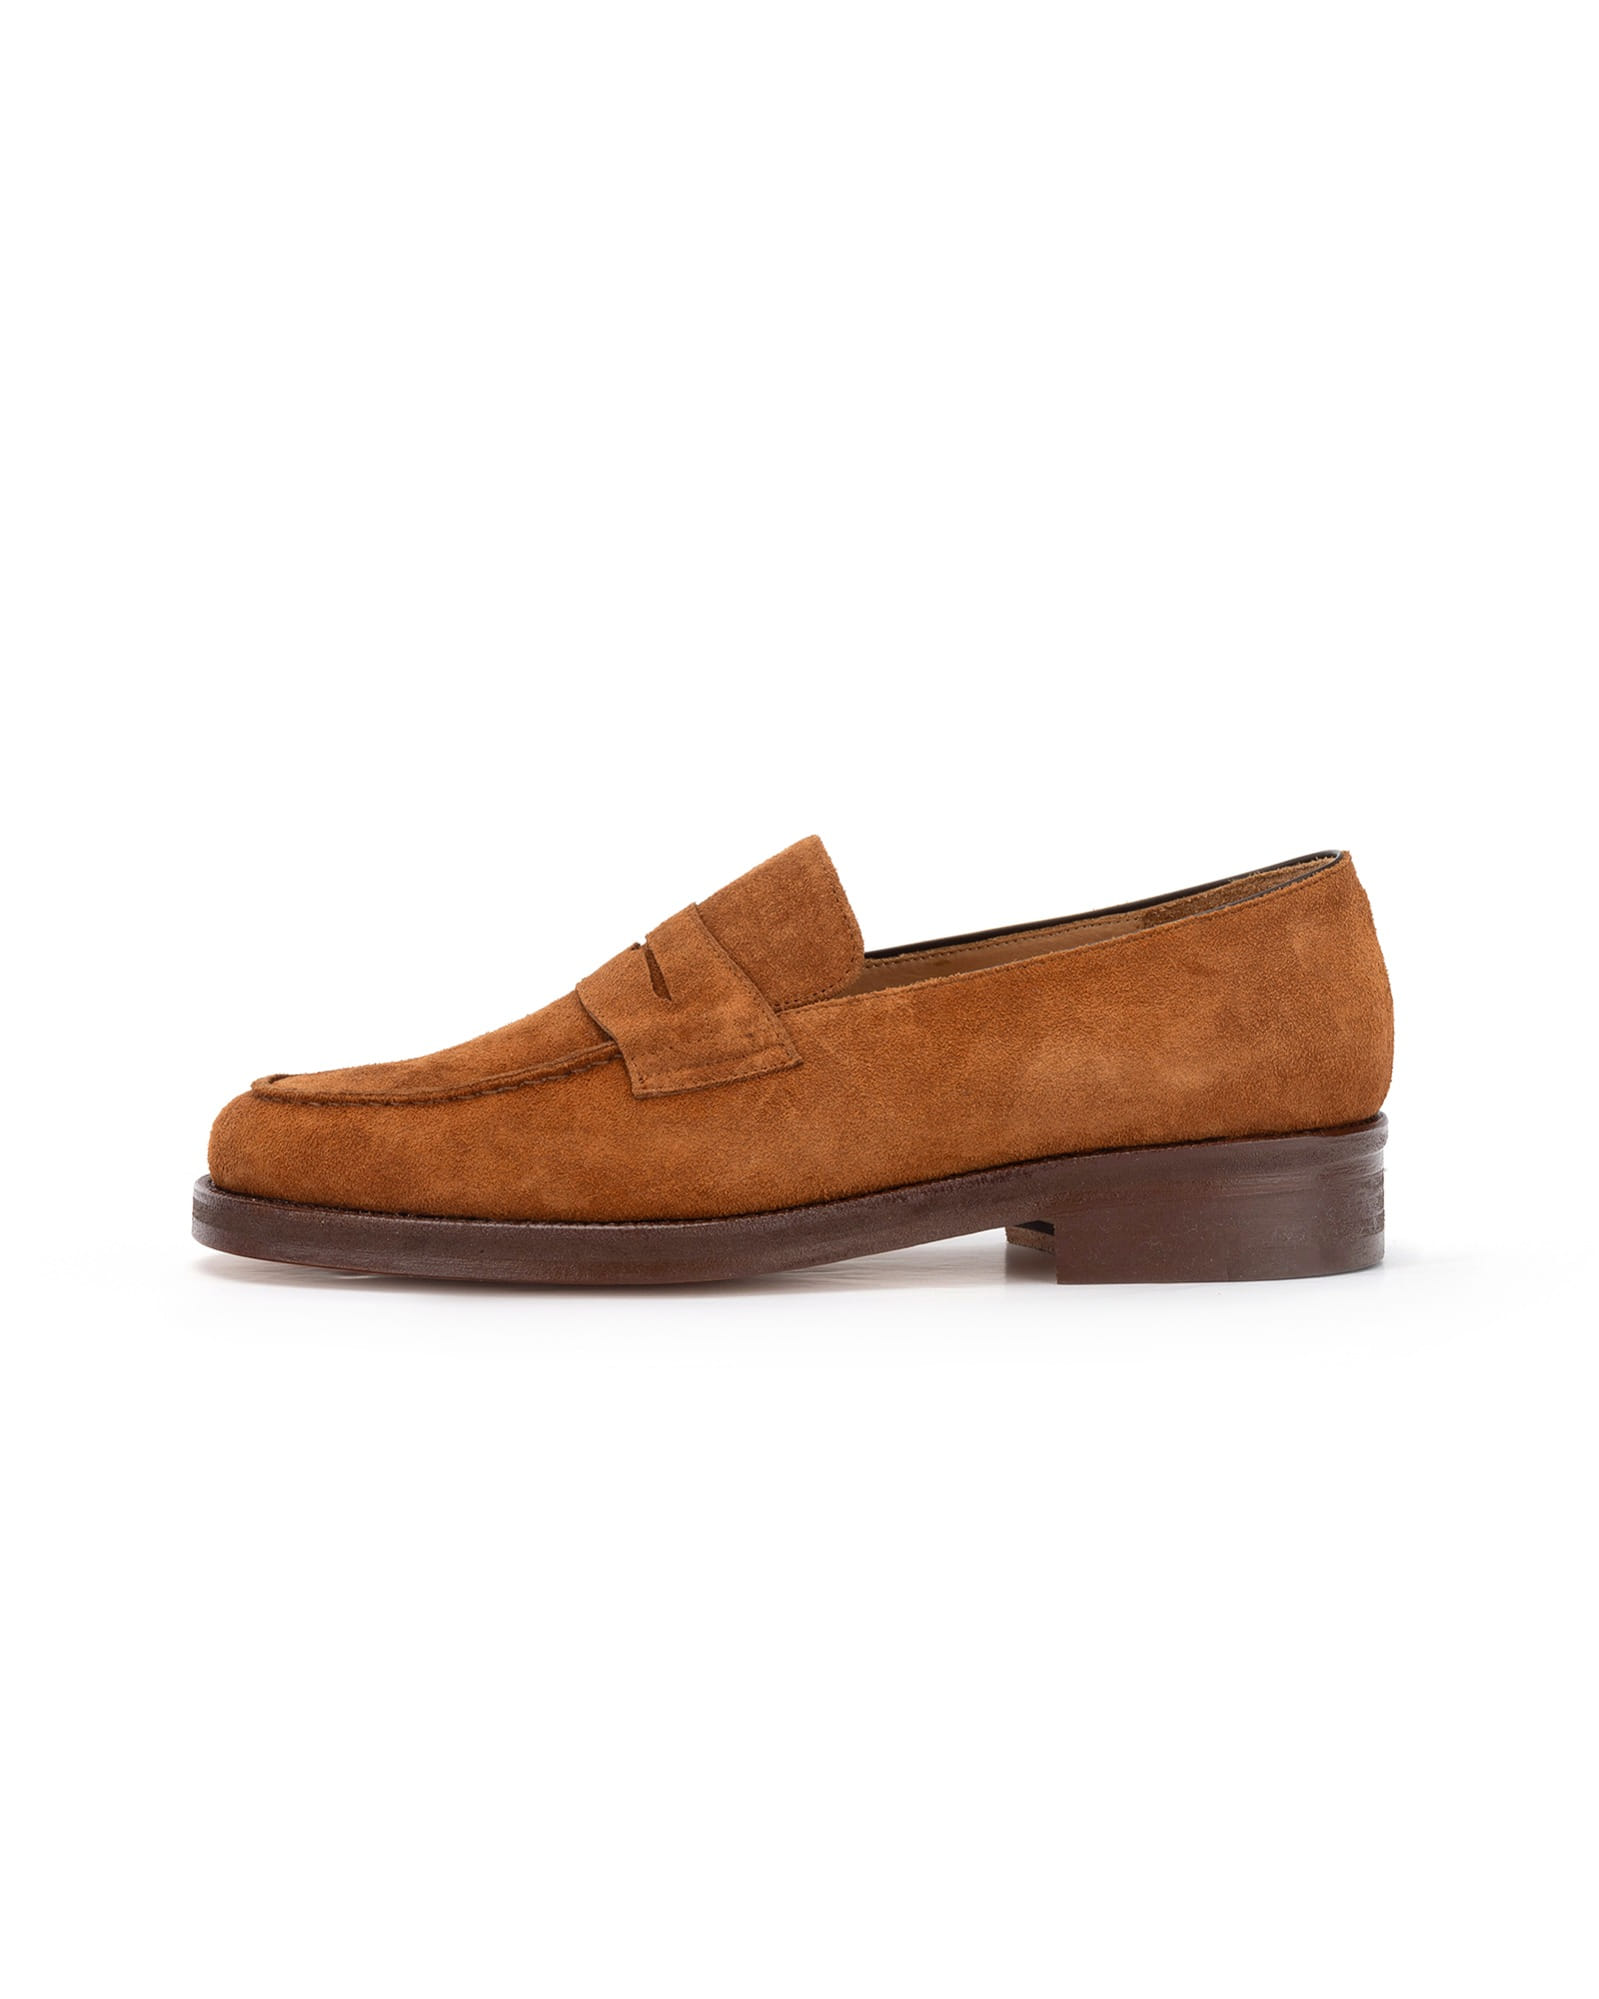 Penny Loafers (Brown)